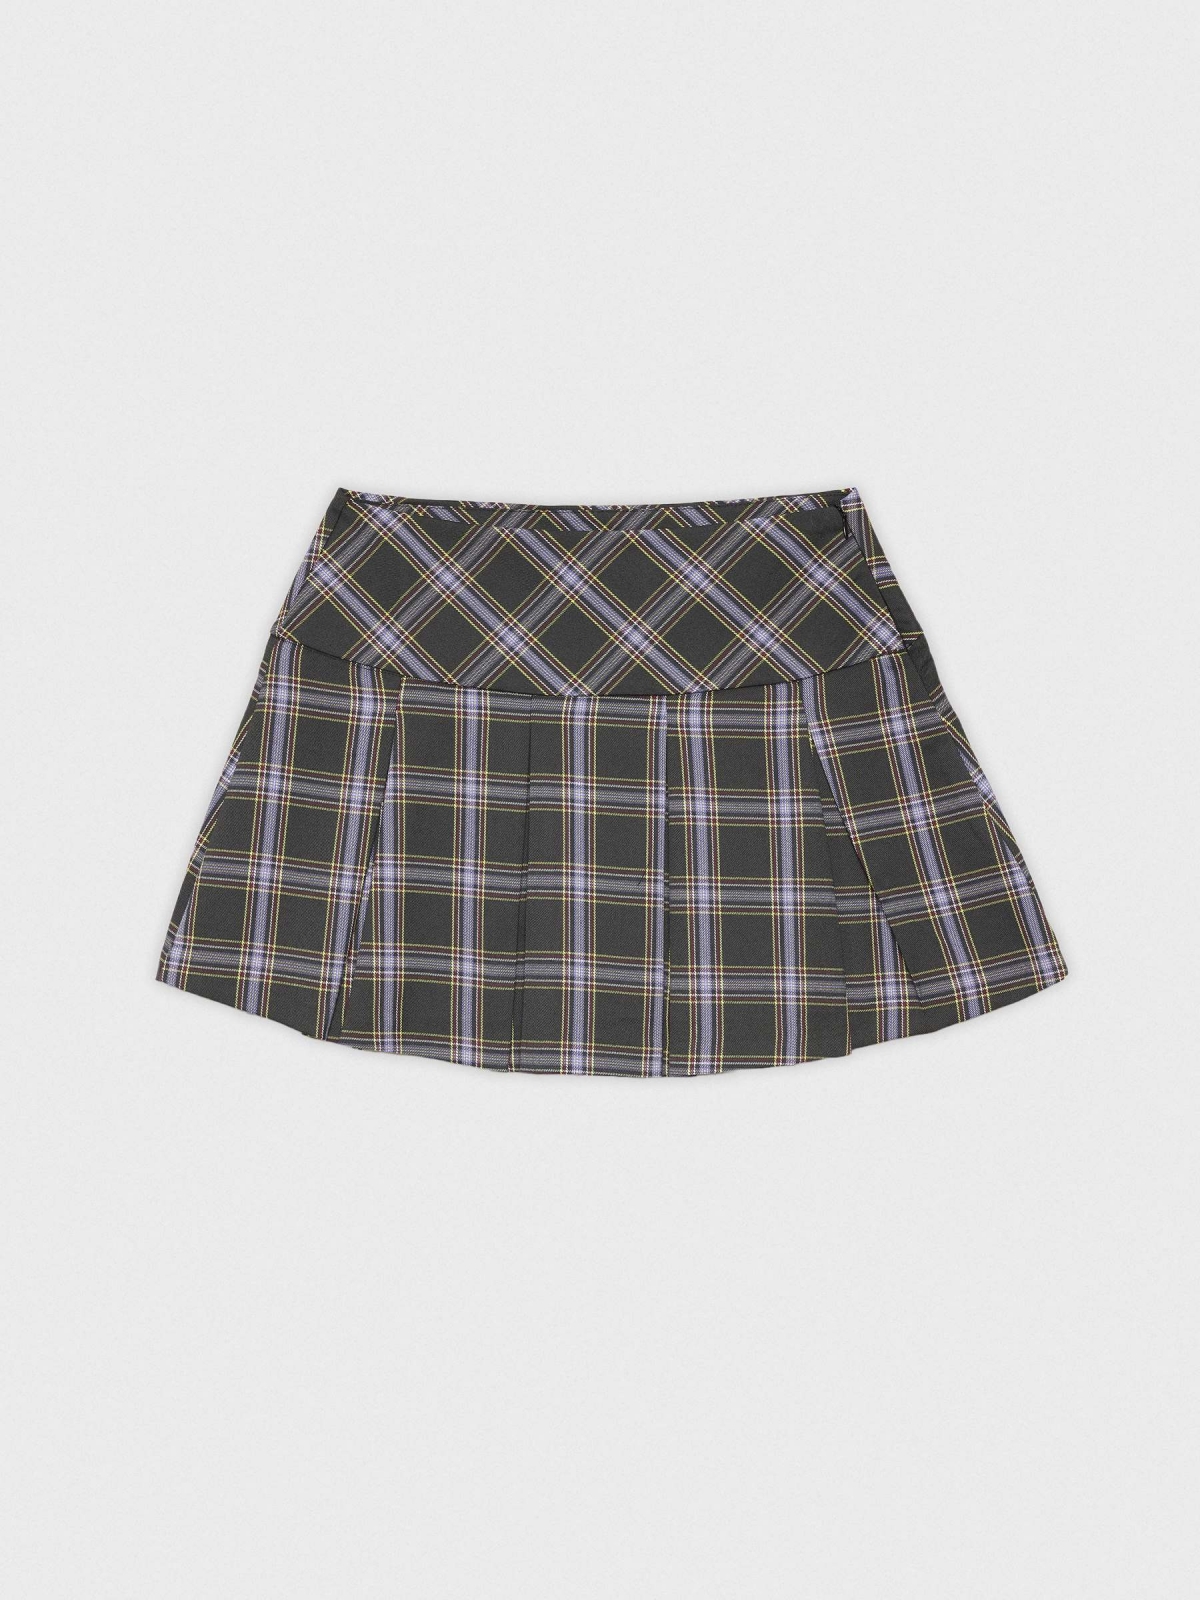  Mini skirt with checkered boards black